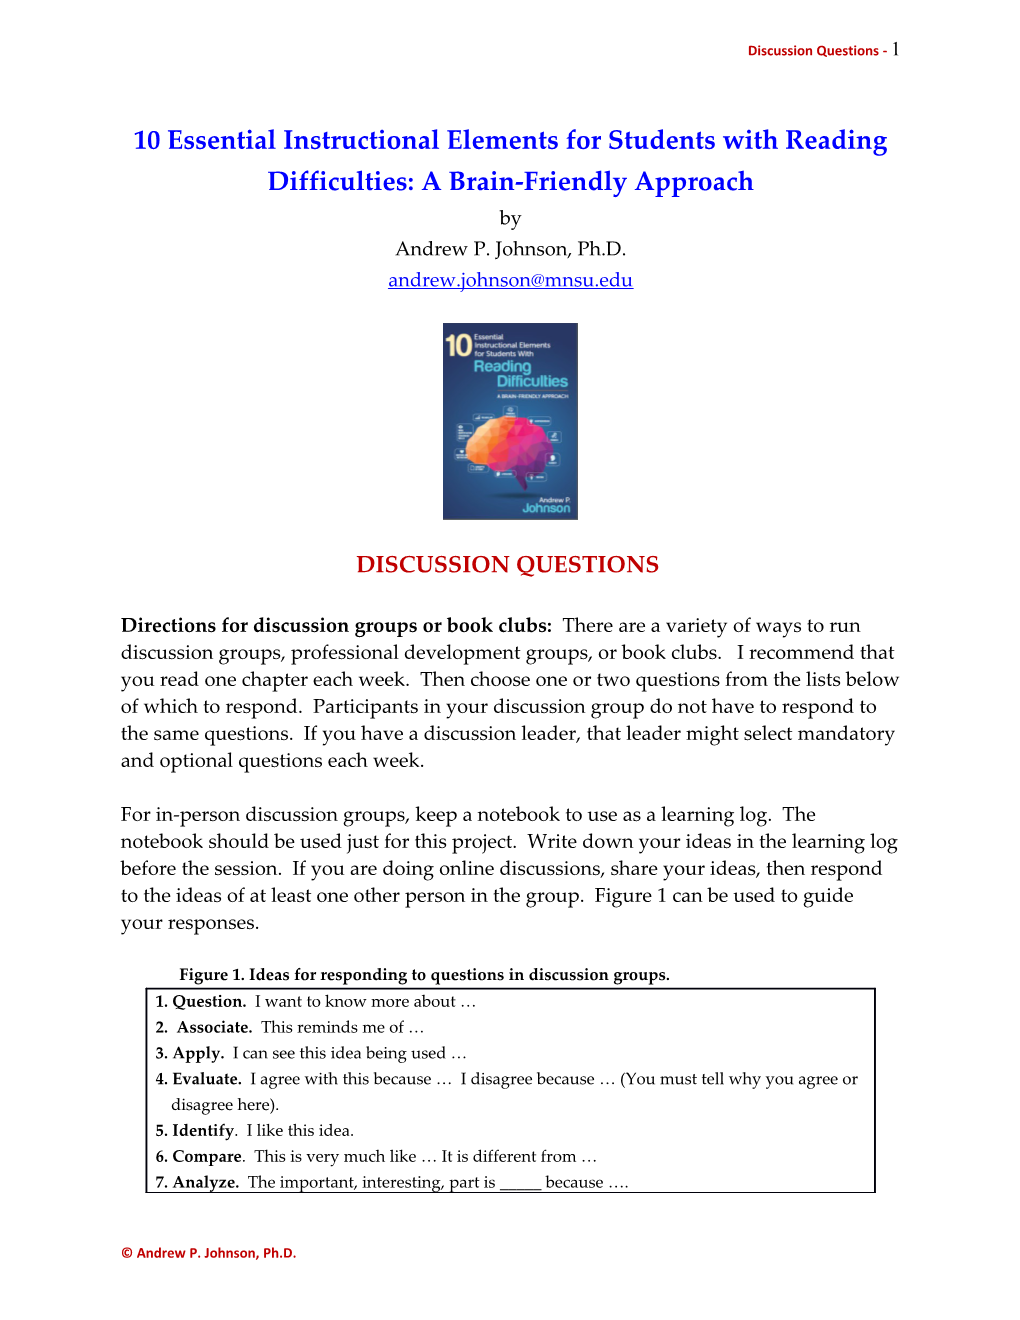 10 Essential Instructional Elements for Students with Reading Difficulties: a Brain-Friendly